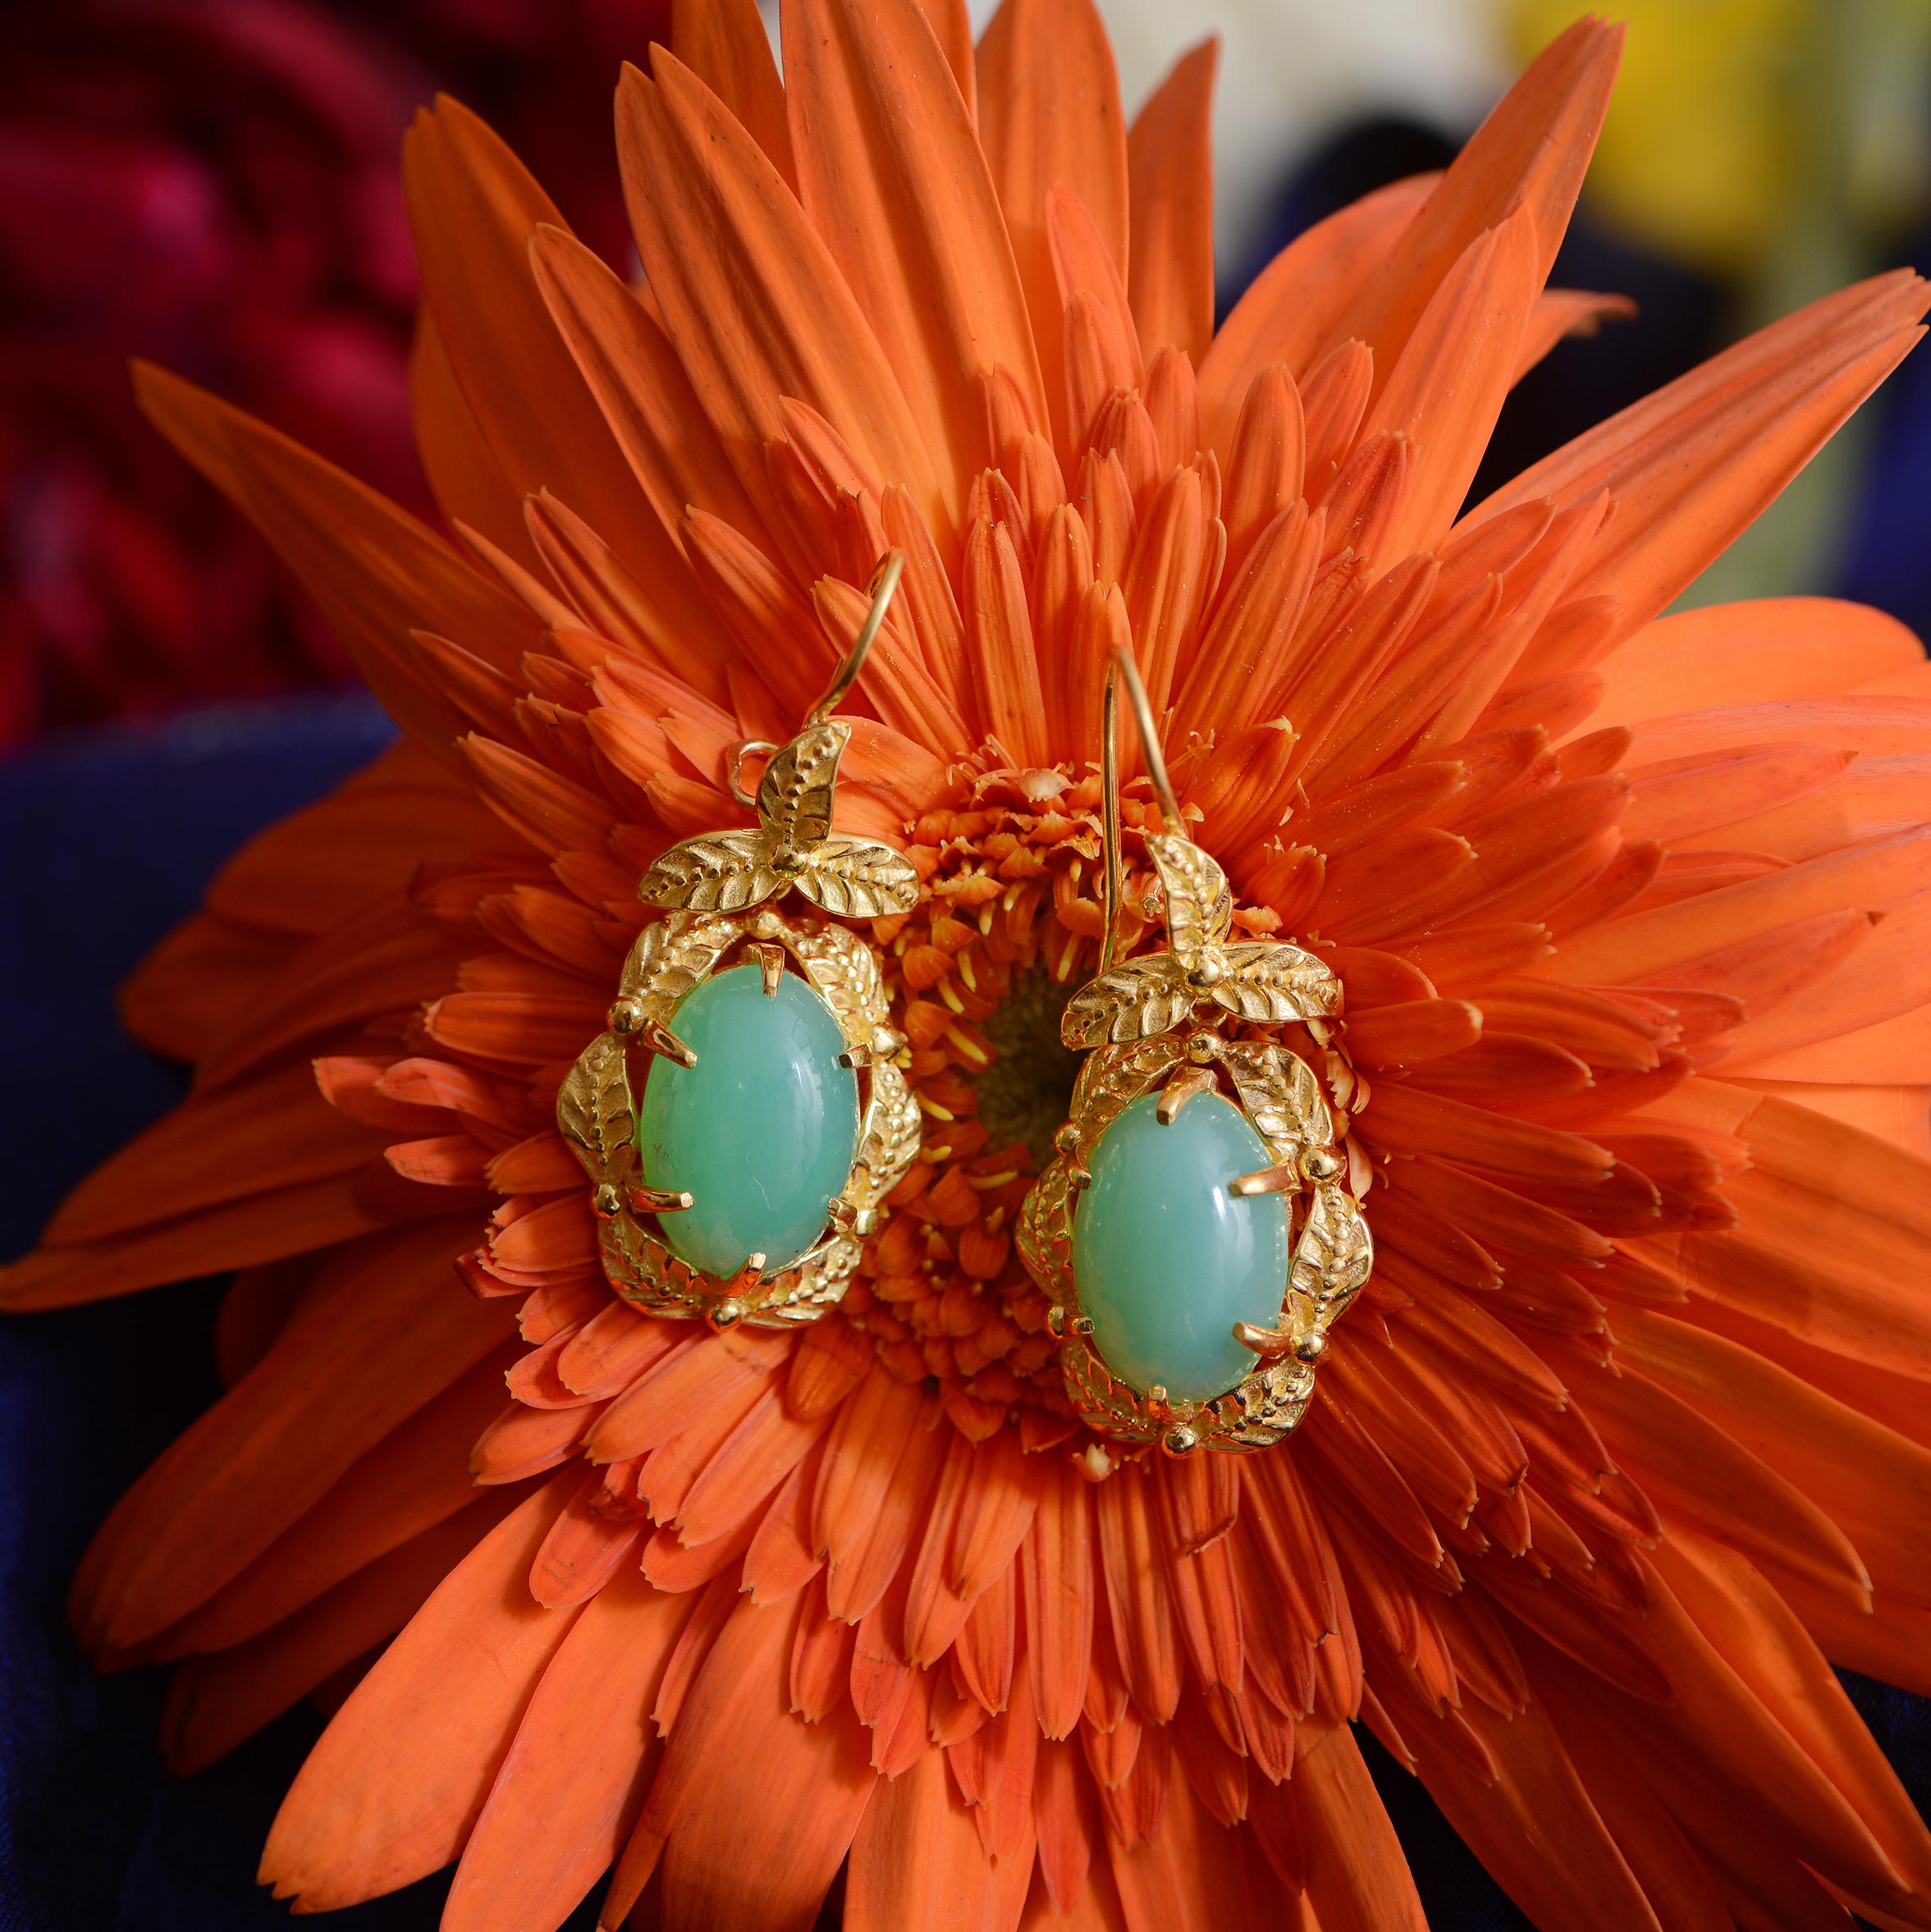 

These gorgeous earrings have been handmade in our workshops. They feature chrysoprase drops which are set in exquisite hand engraving work. The earrings are made in sterling silver coated in 24k gold vermeil. They have a matching pendant, bracelet